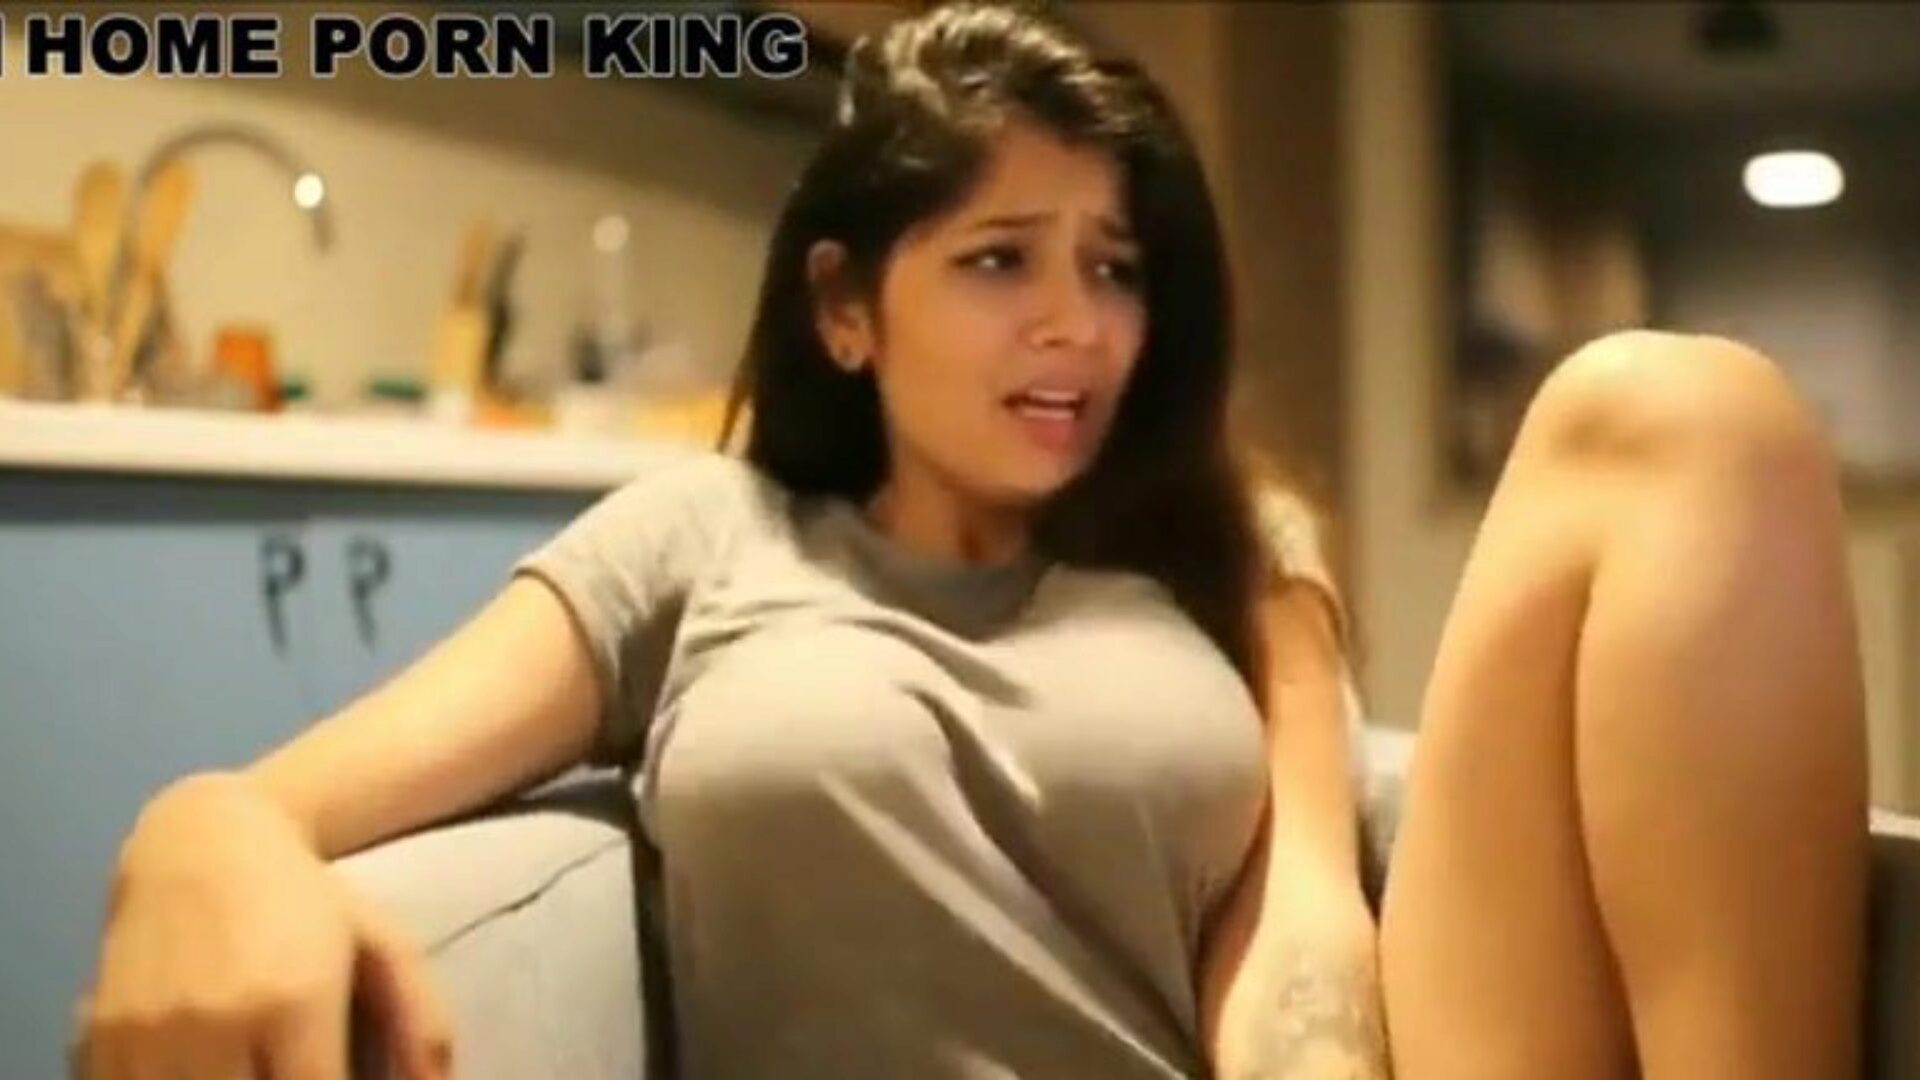 home porn king hd pictures & video